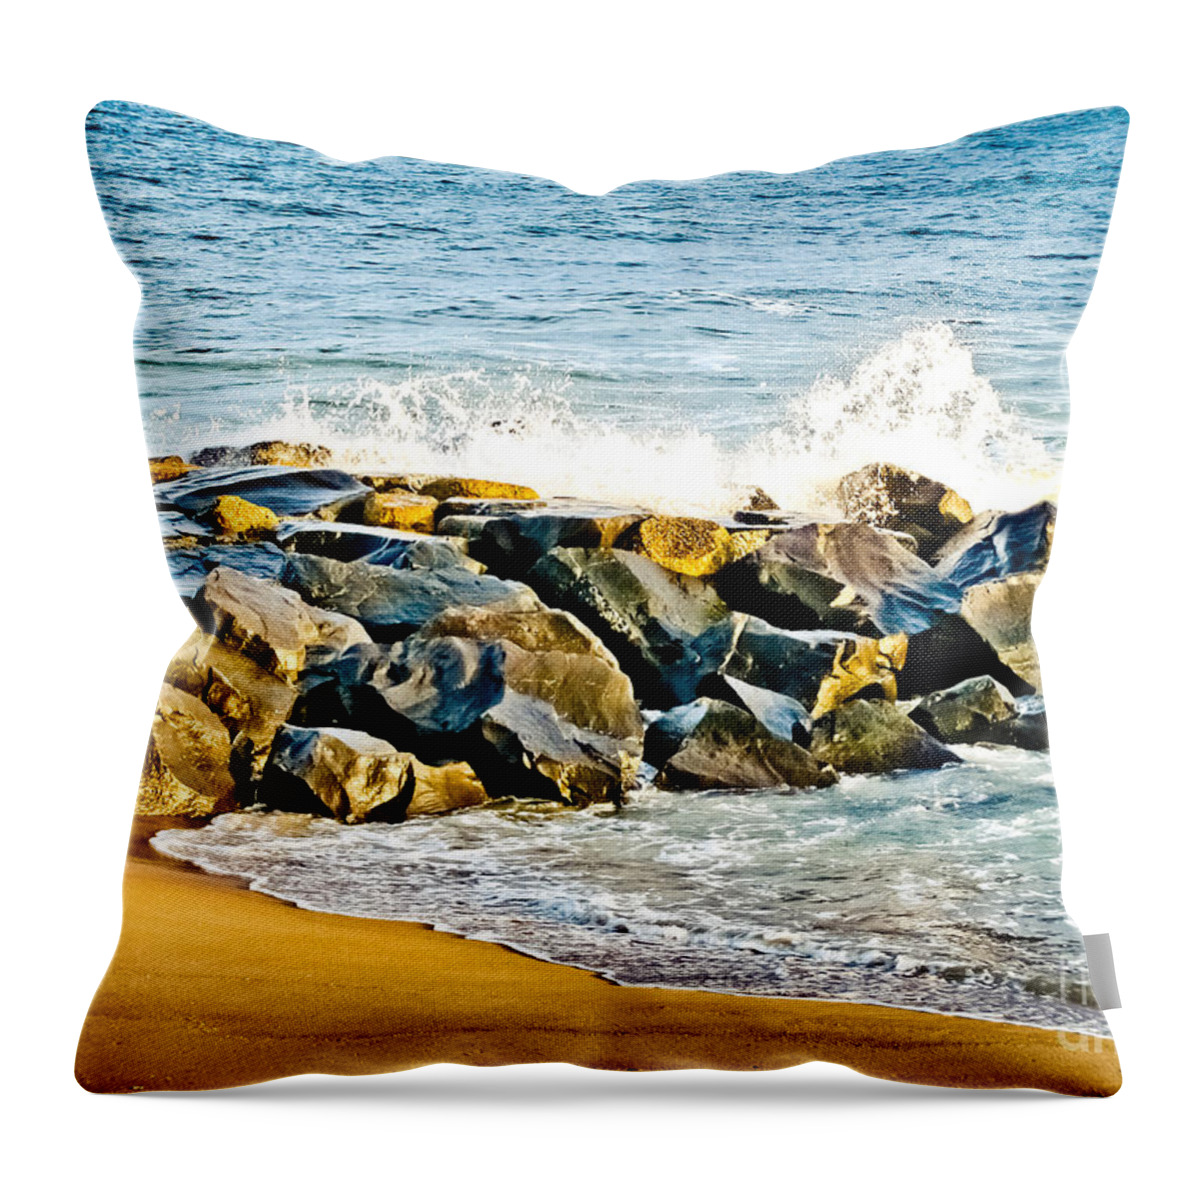 Ocean Throw Pillow featuring the photograph Ocean Jetty by Colleen Kammerer